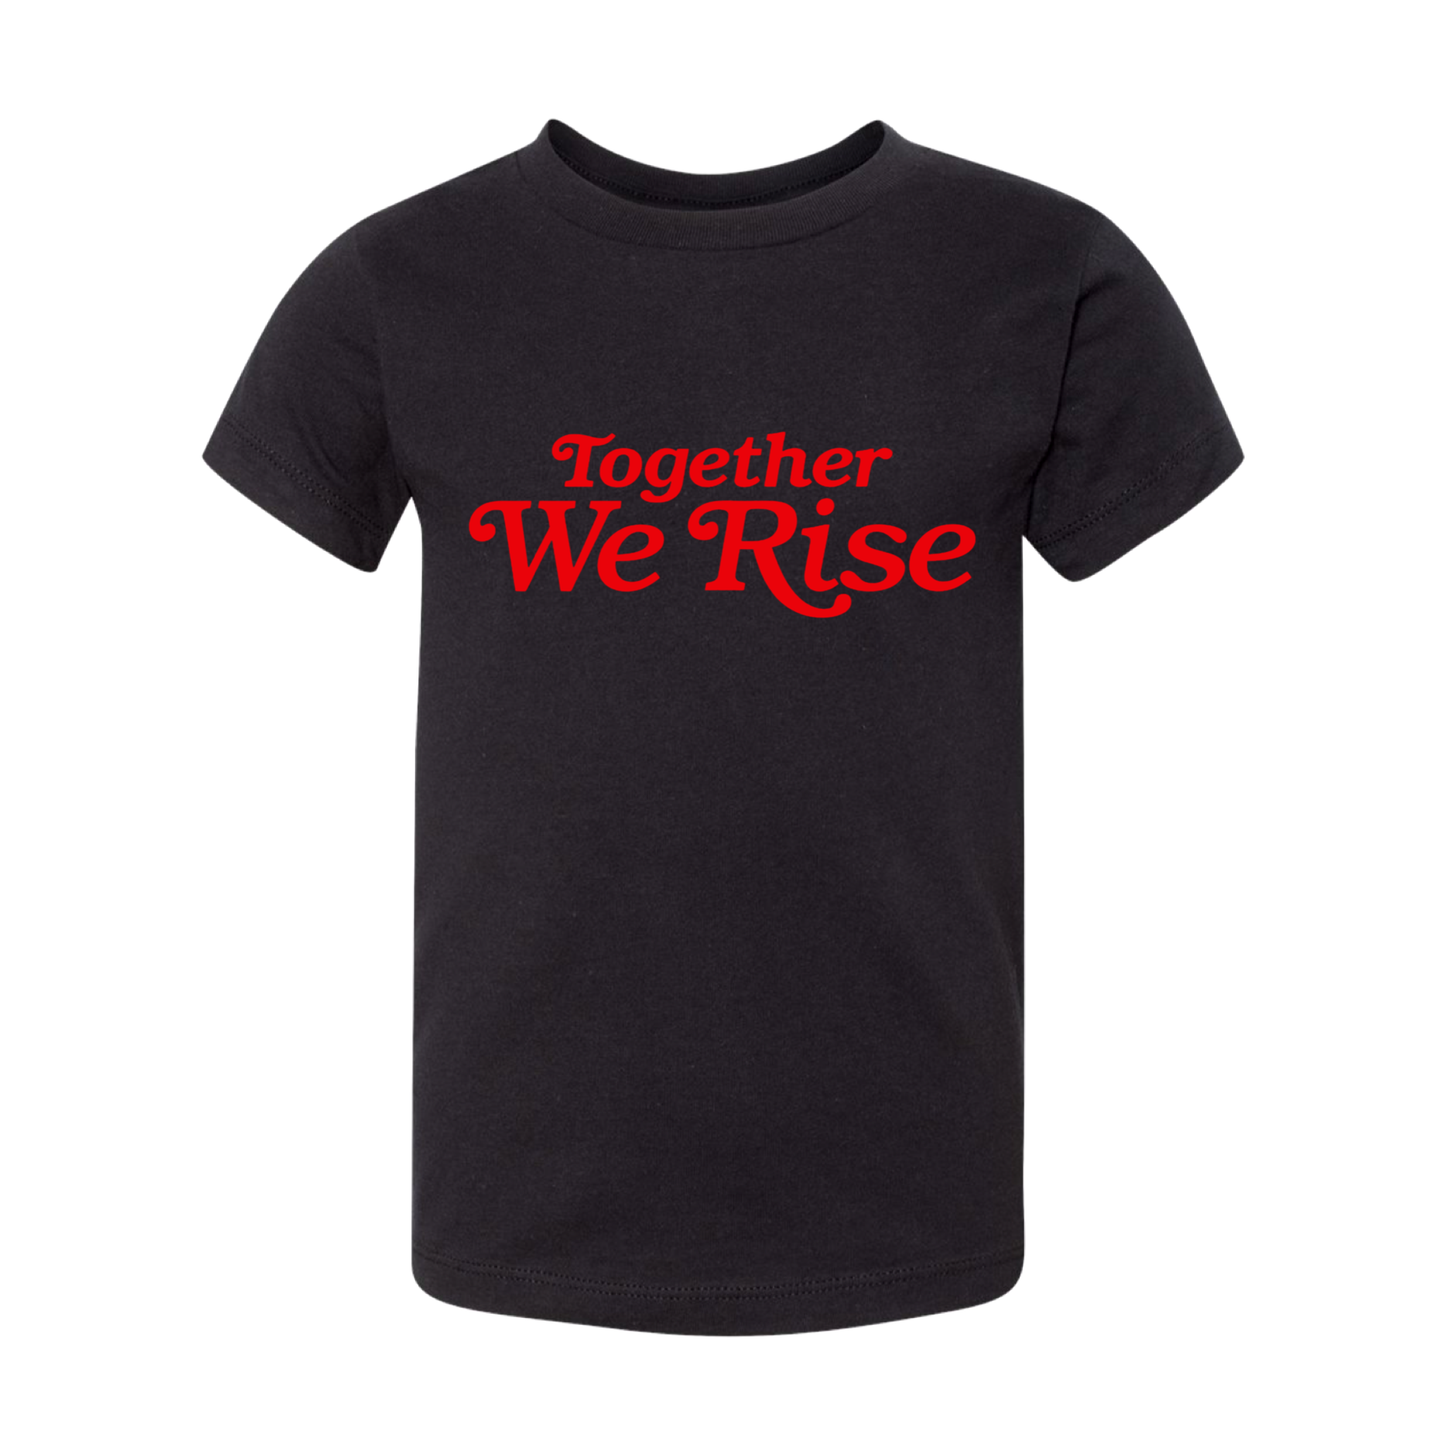 Together We Rise Children's Tee - Black